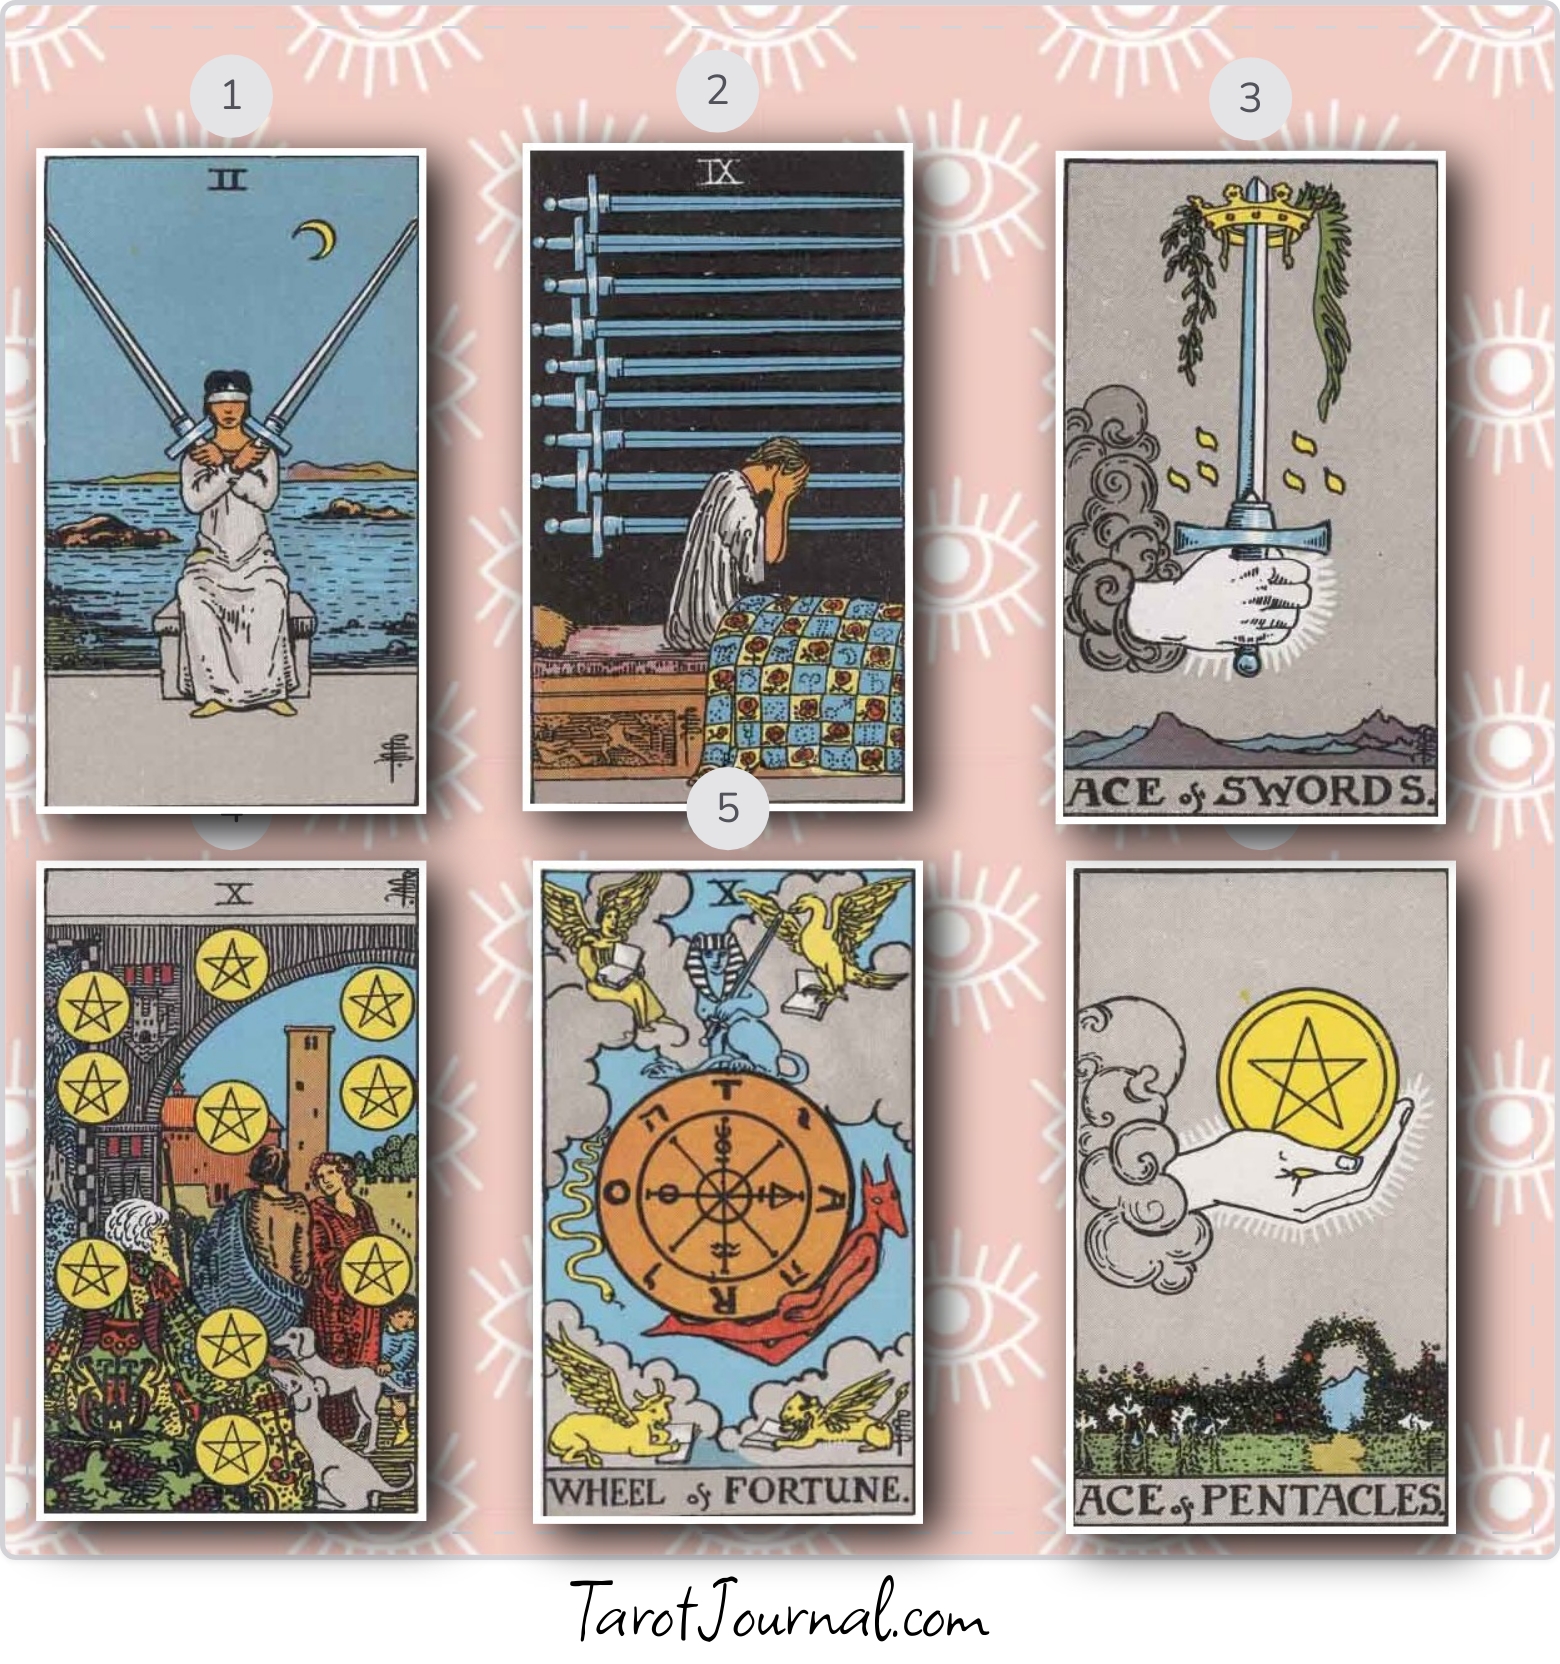 Reveal the Path that will take you in the right direction - tarot reading by Hannah